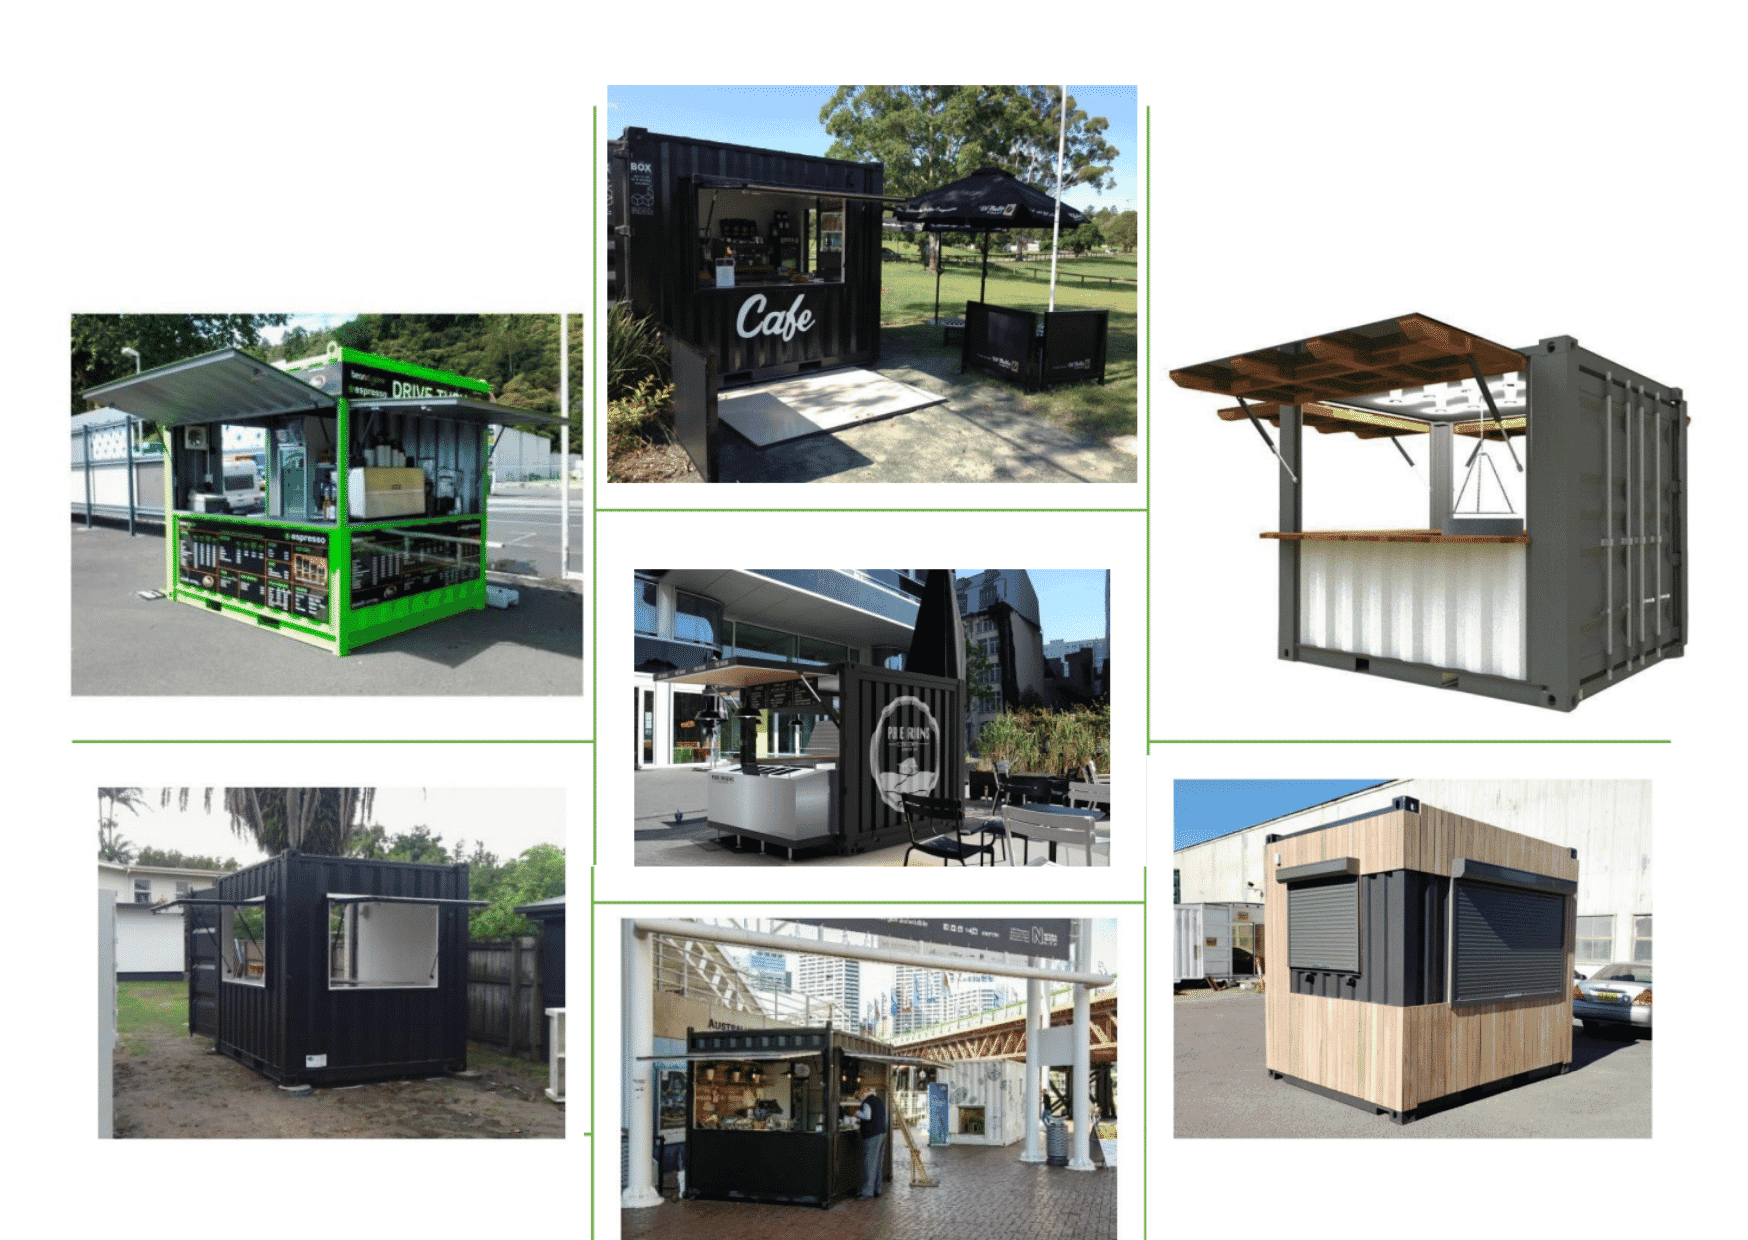 Shipping Container Pop-Up Stores